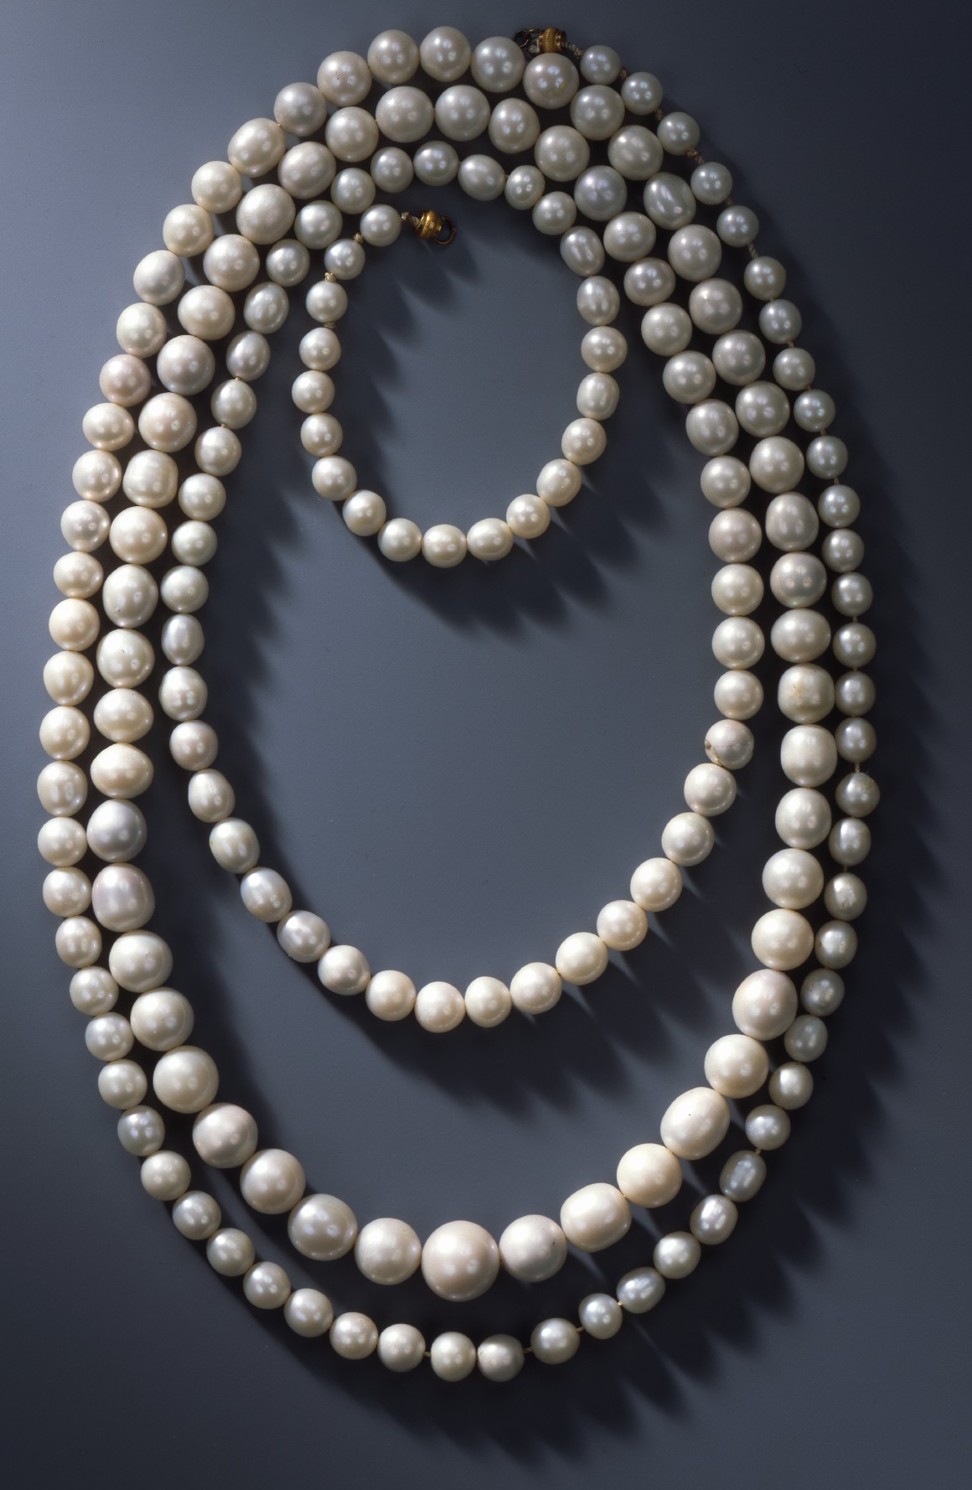 A necklace made of 177 Saxon pearls